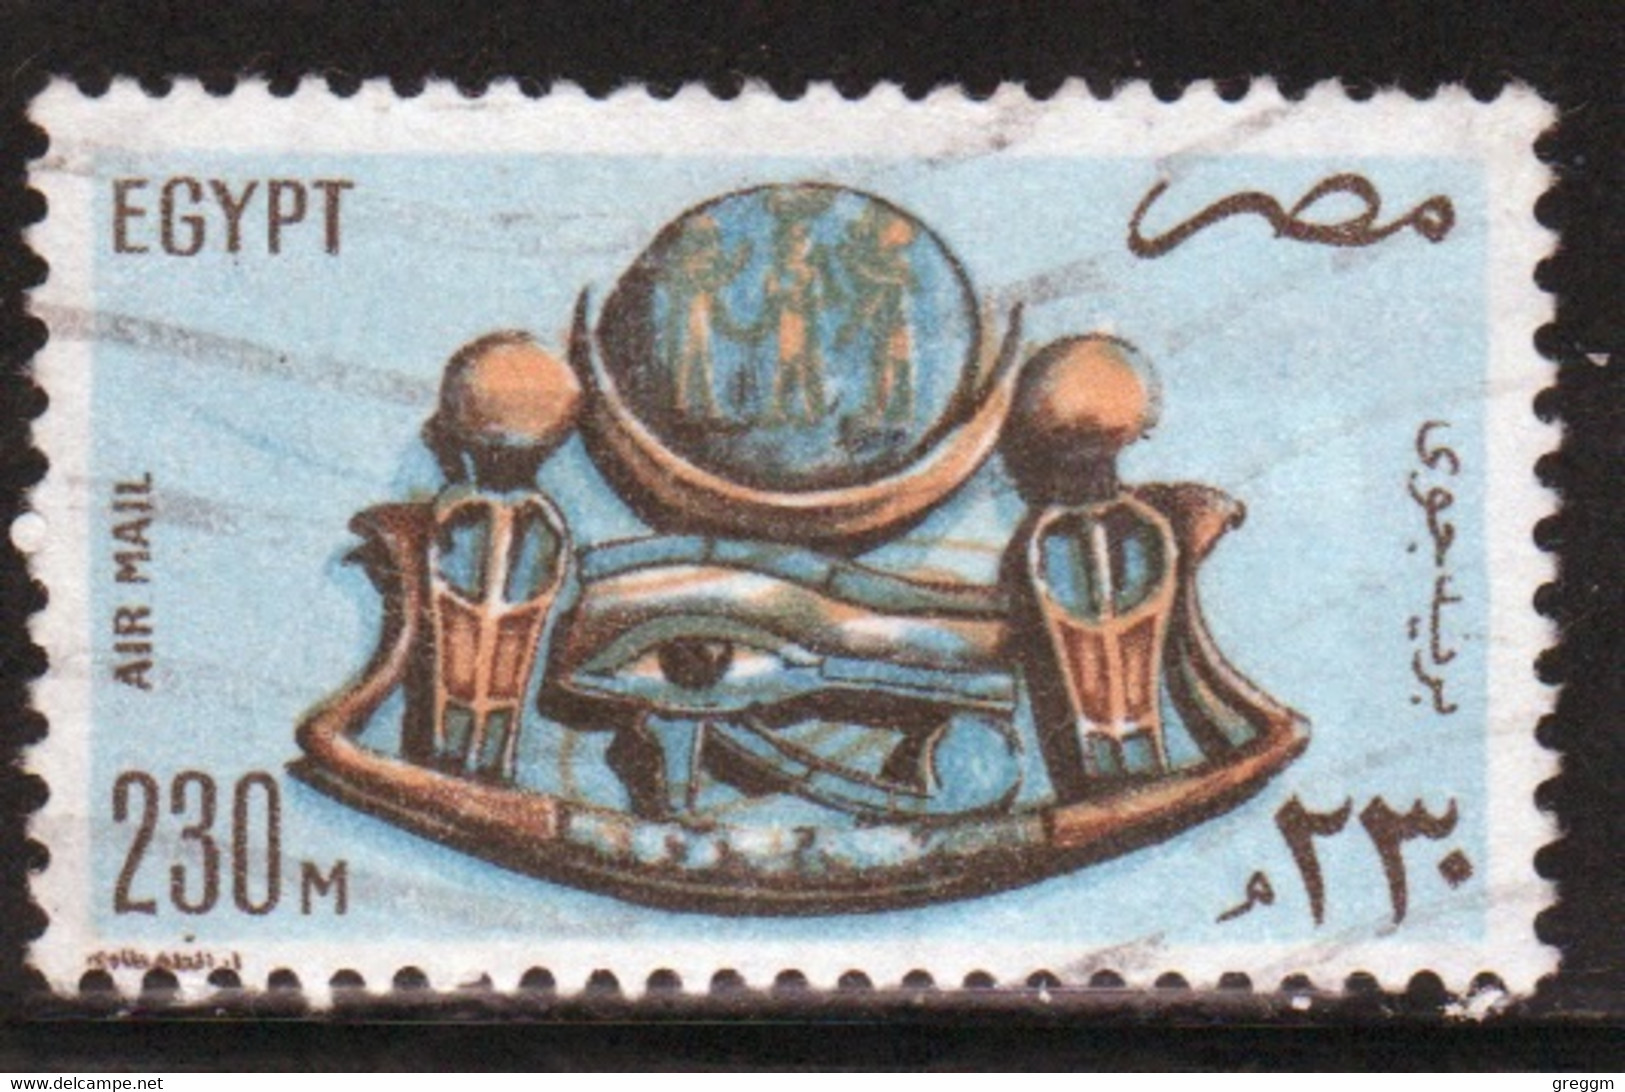 Egypt UAR 1981 Single 230m Stamp Issued To Celebrate Air In Fine Used - Oblitérés